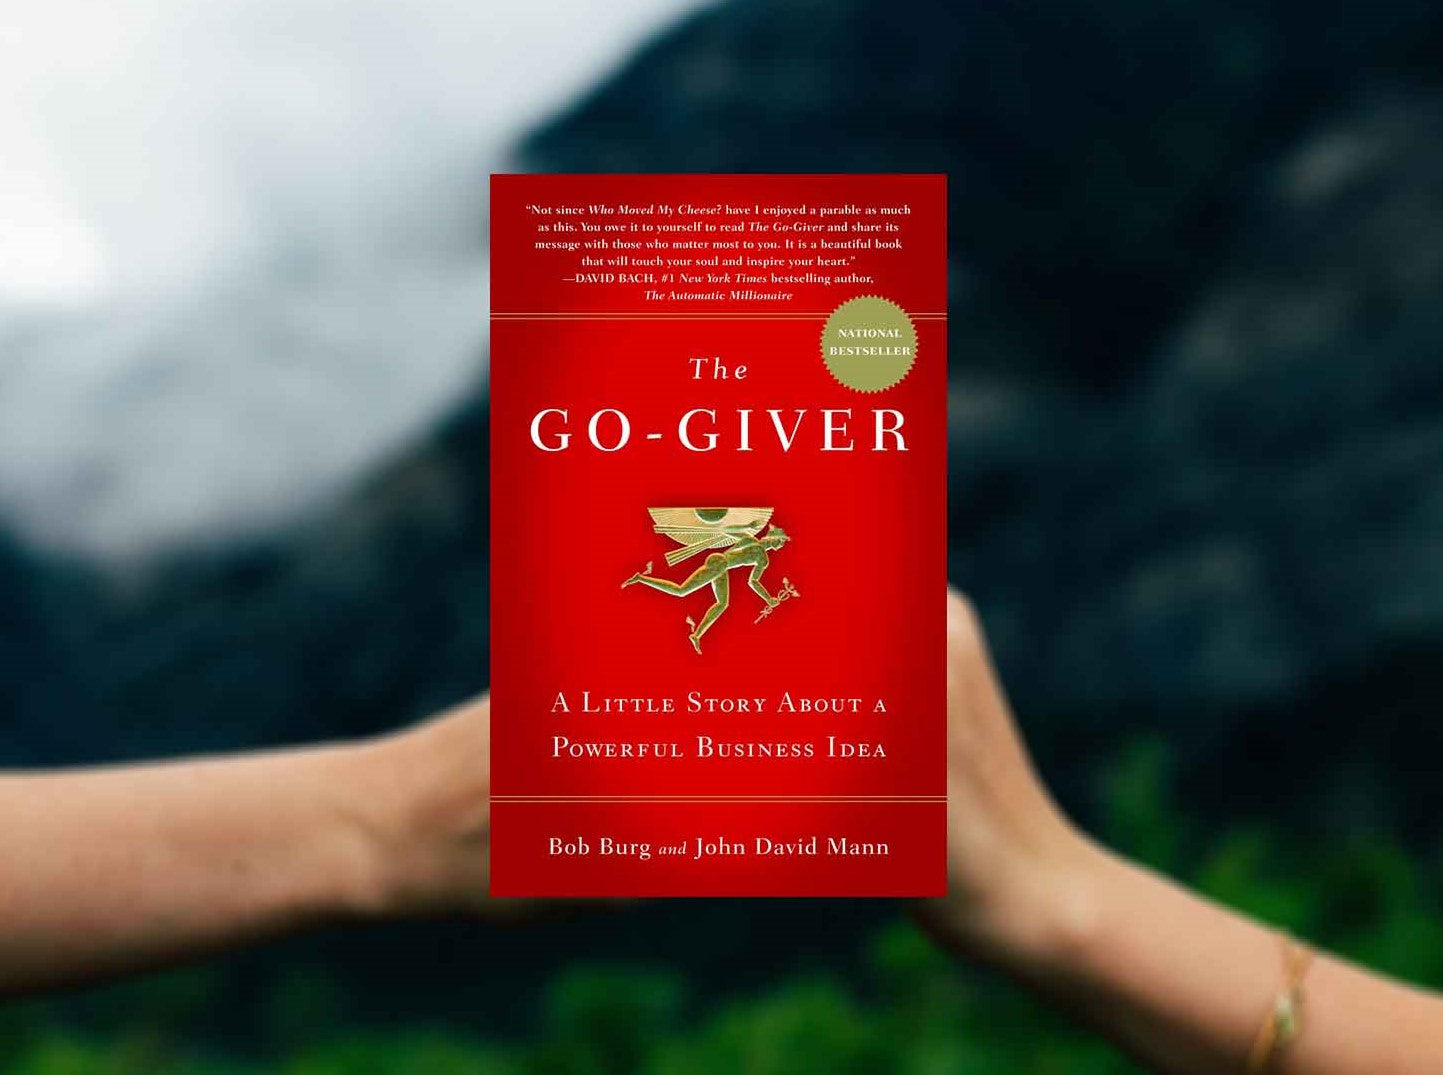 A Book Review: "The Go-Giver" by Bob Burg